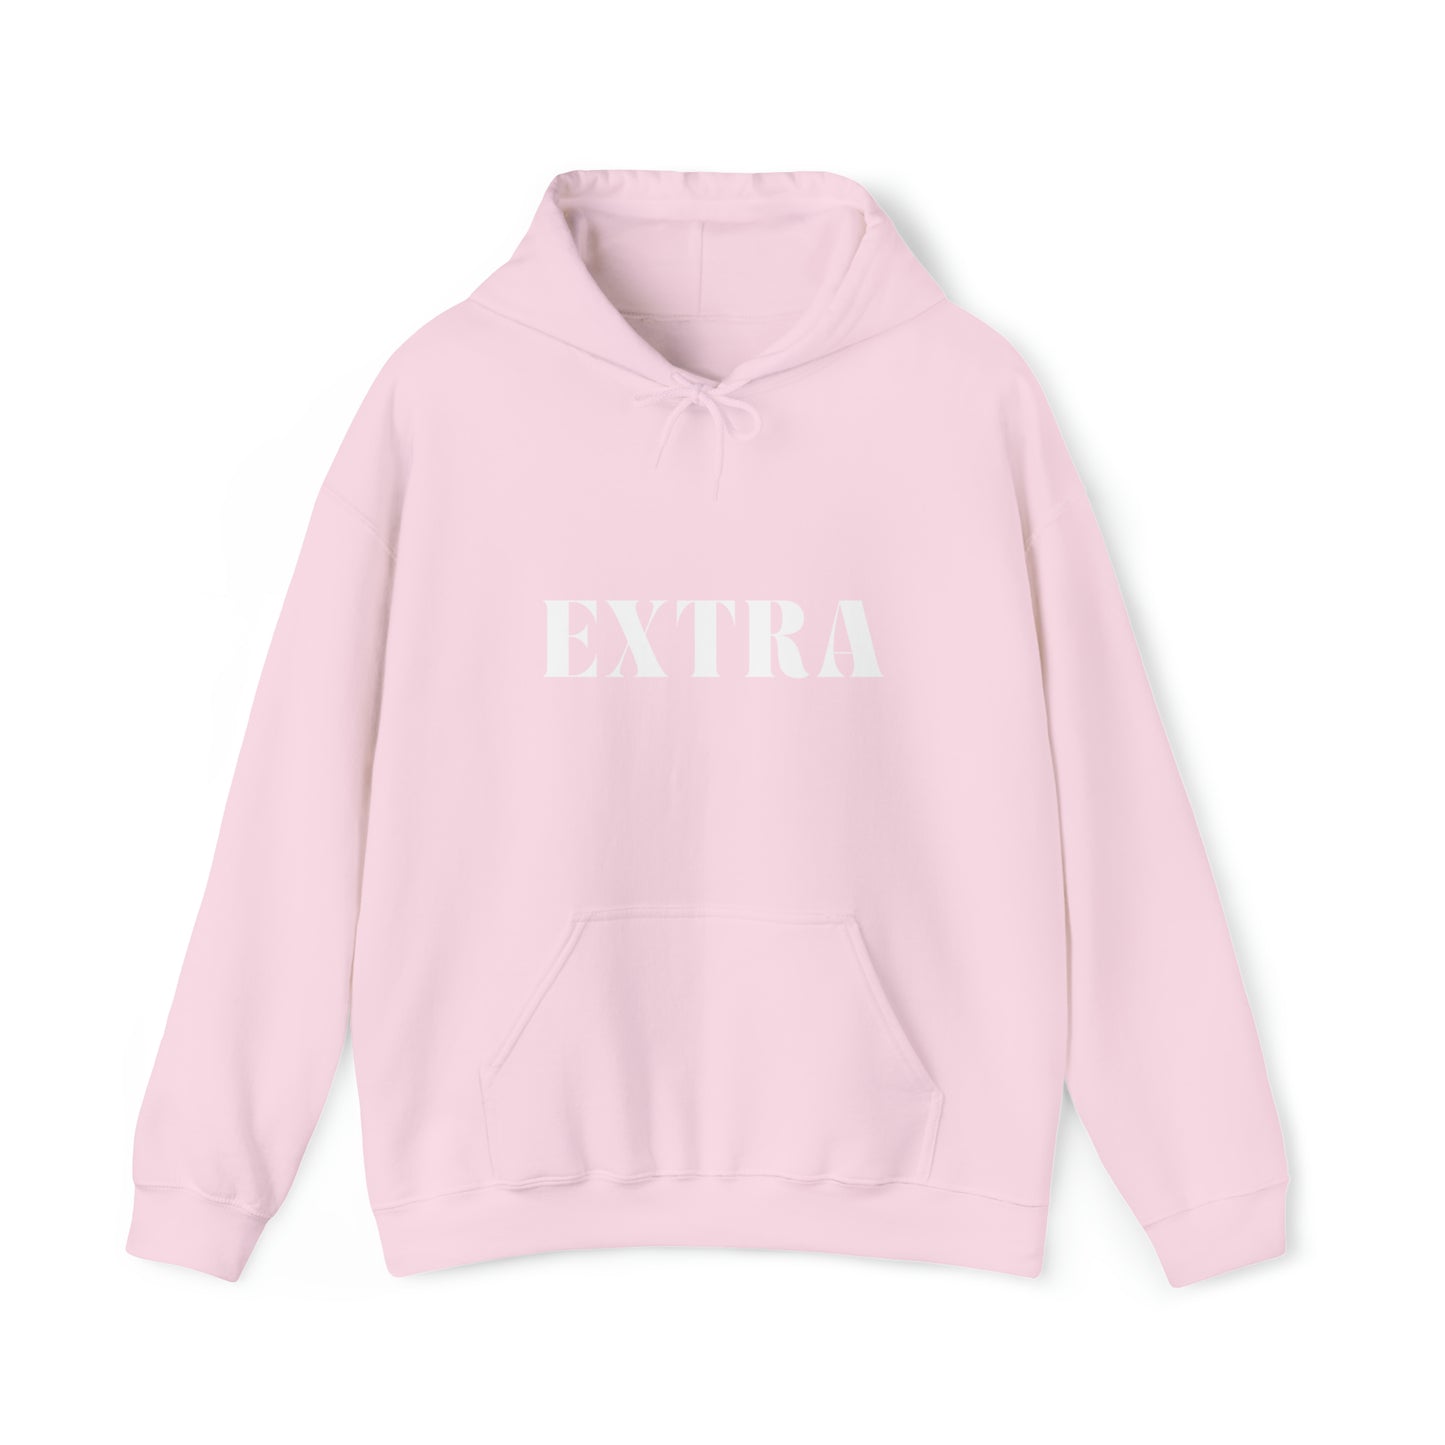 S Light Pink Extra Hoodie from HoodySZN.com